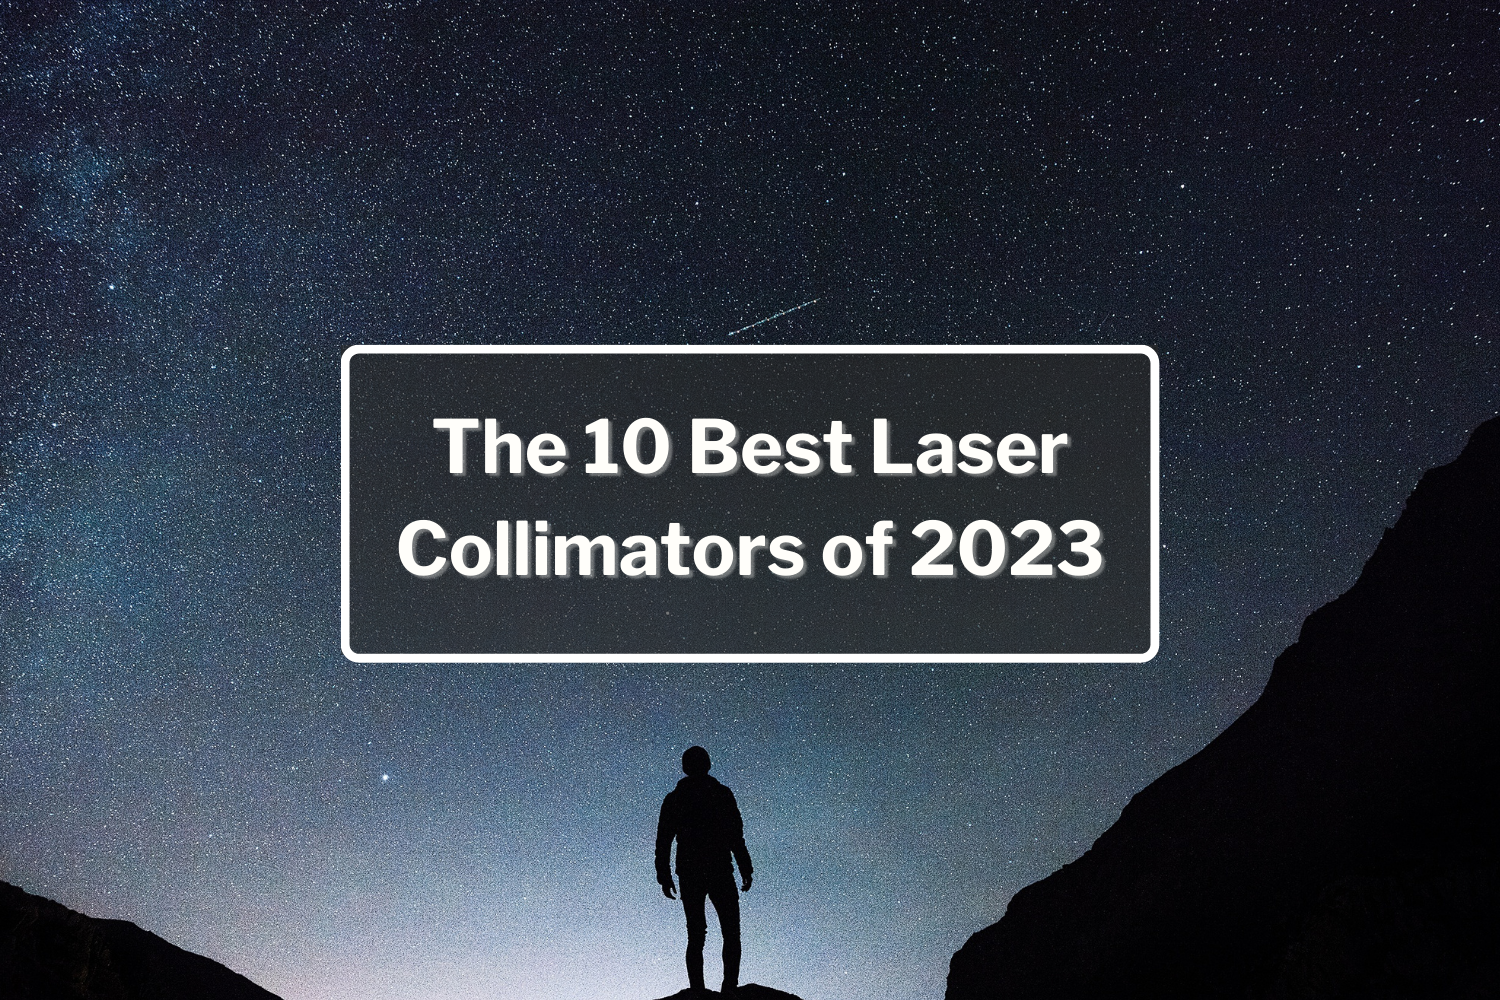 The 10 Best Laser Collimators of 2023